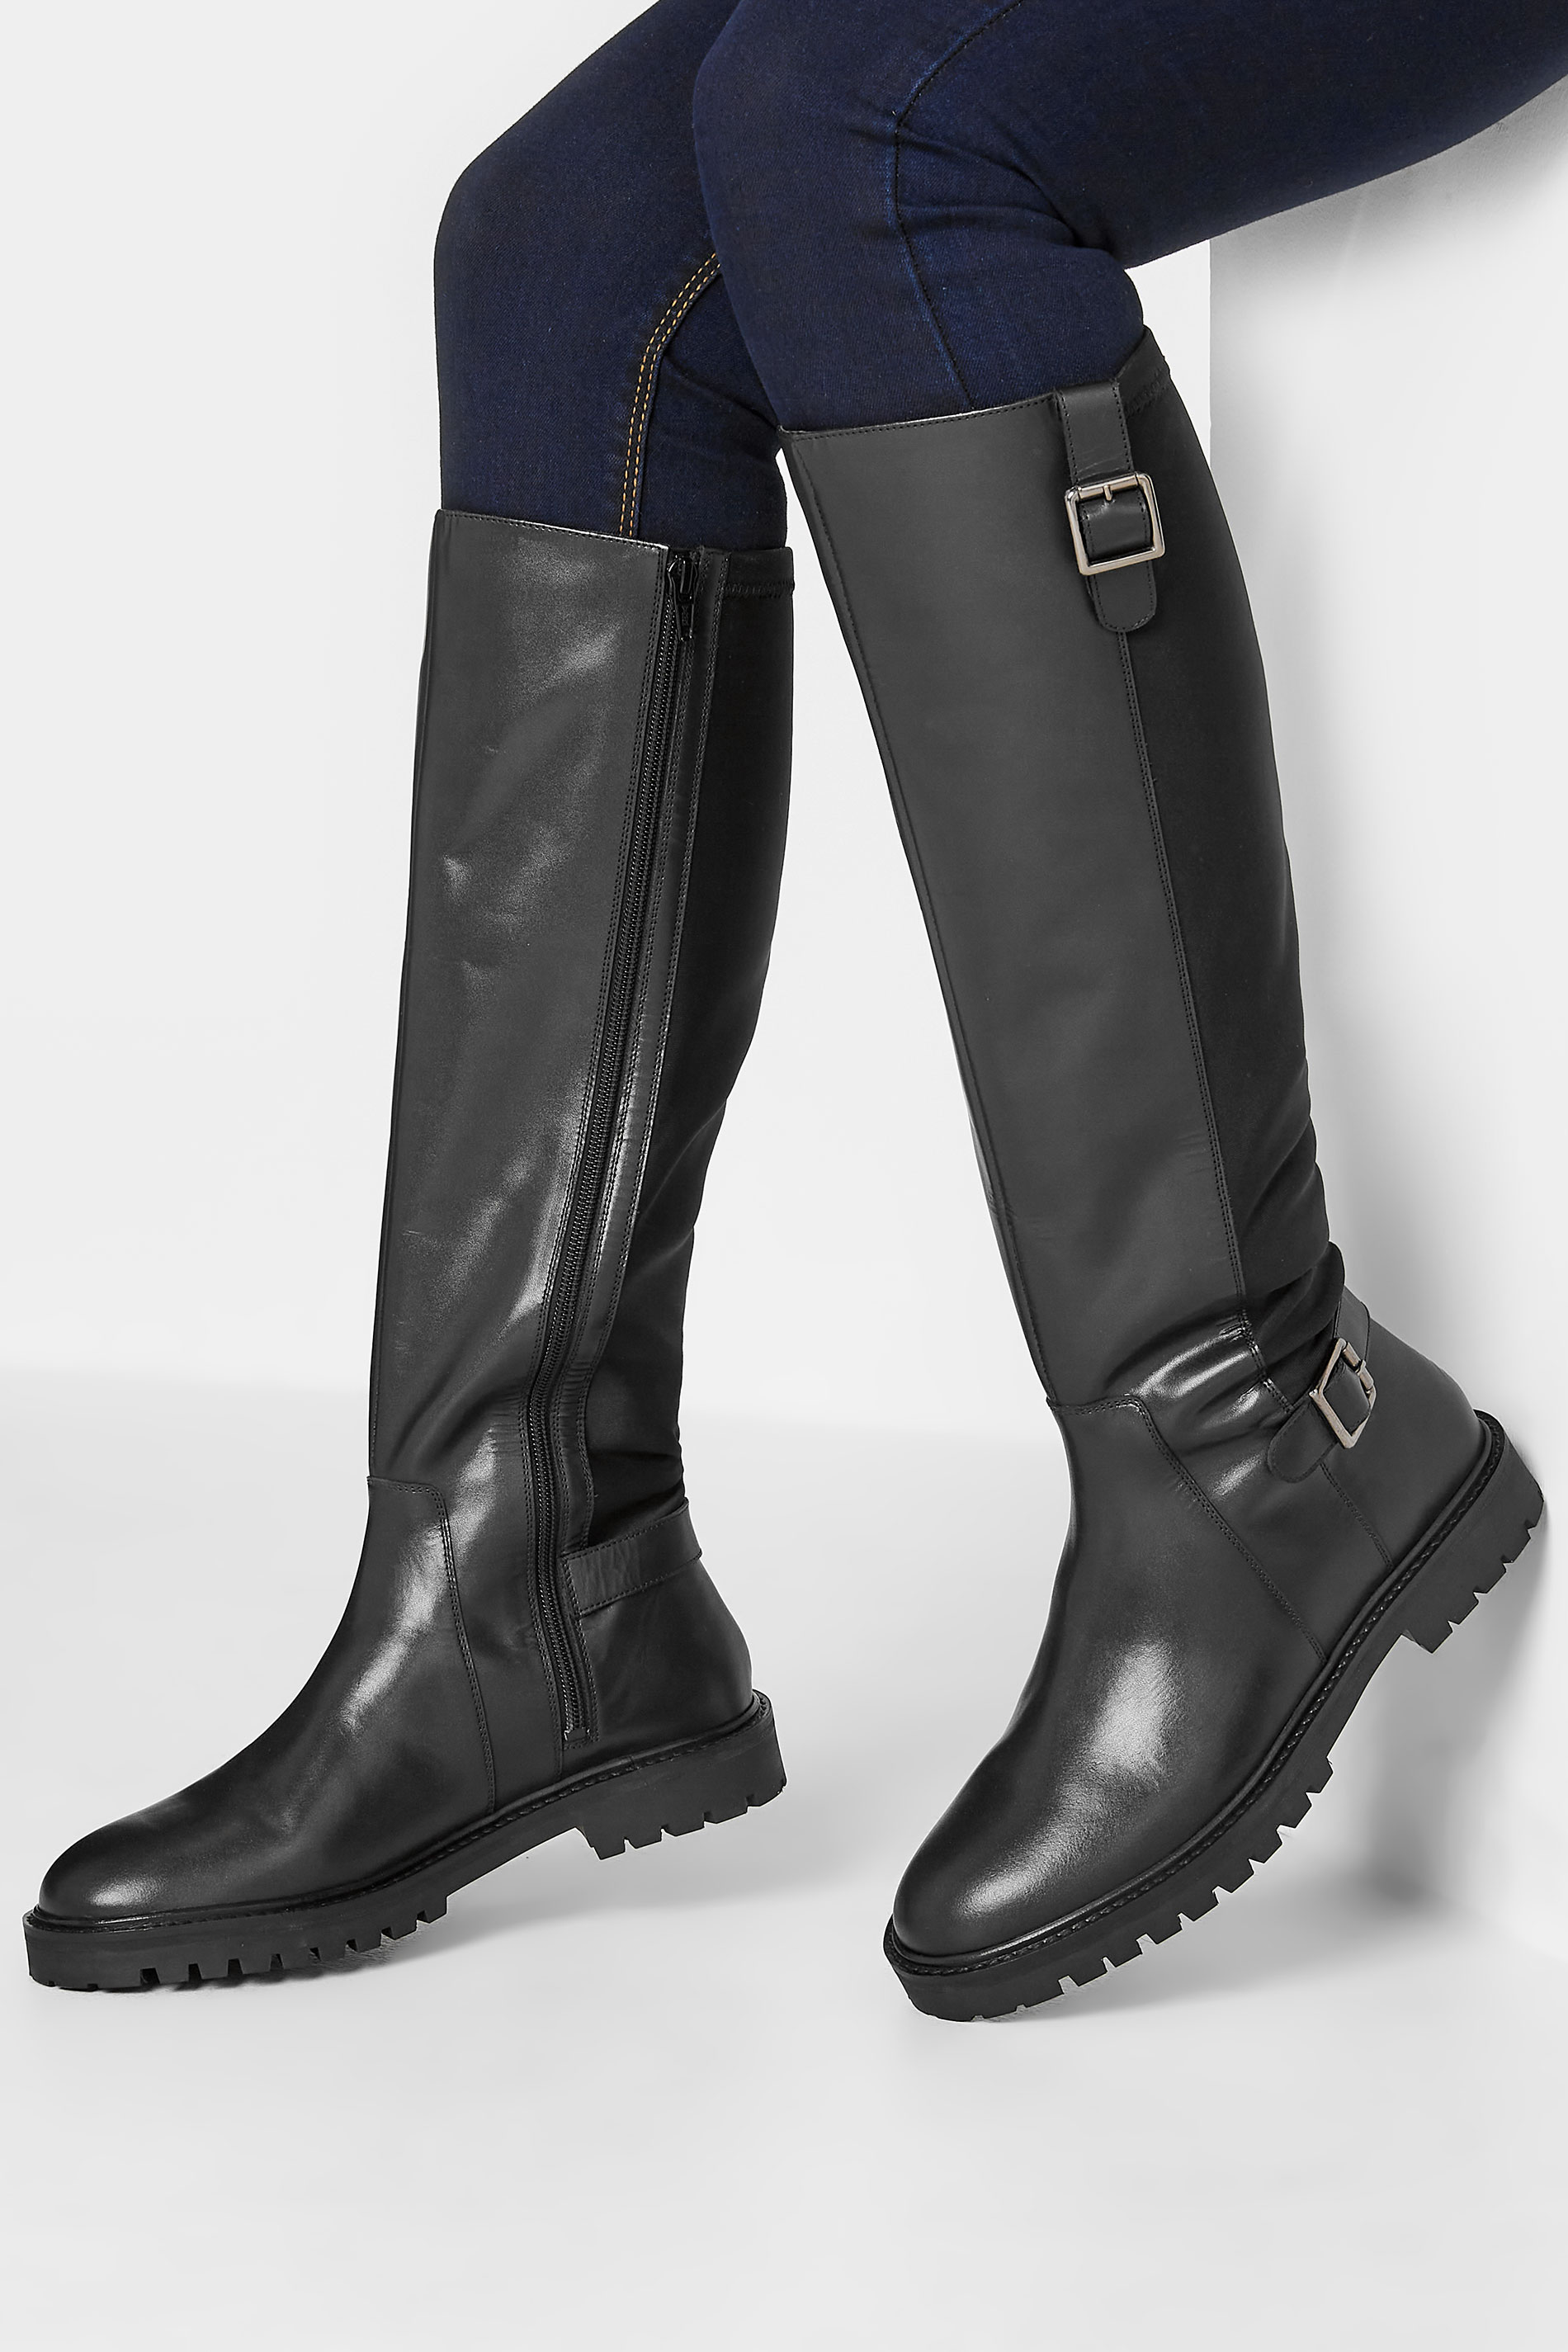 LTS Black Buckle Leather Calf Boots In Standard D Fit 1